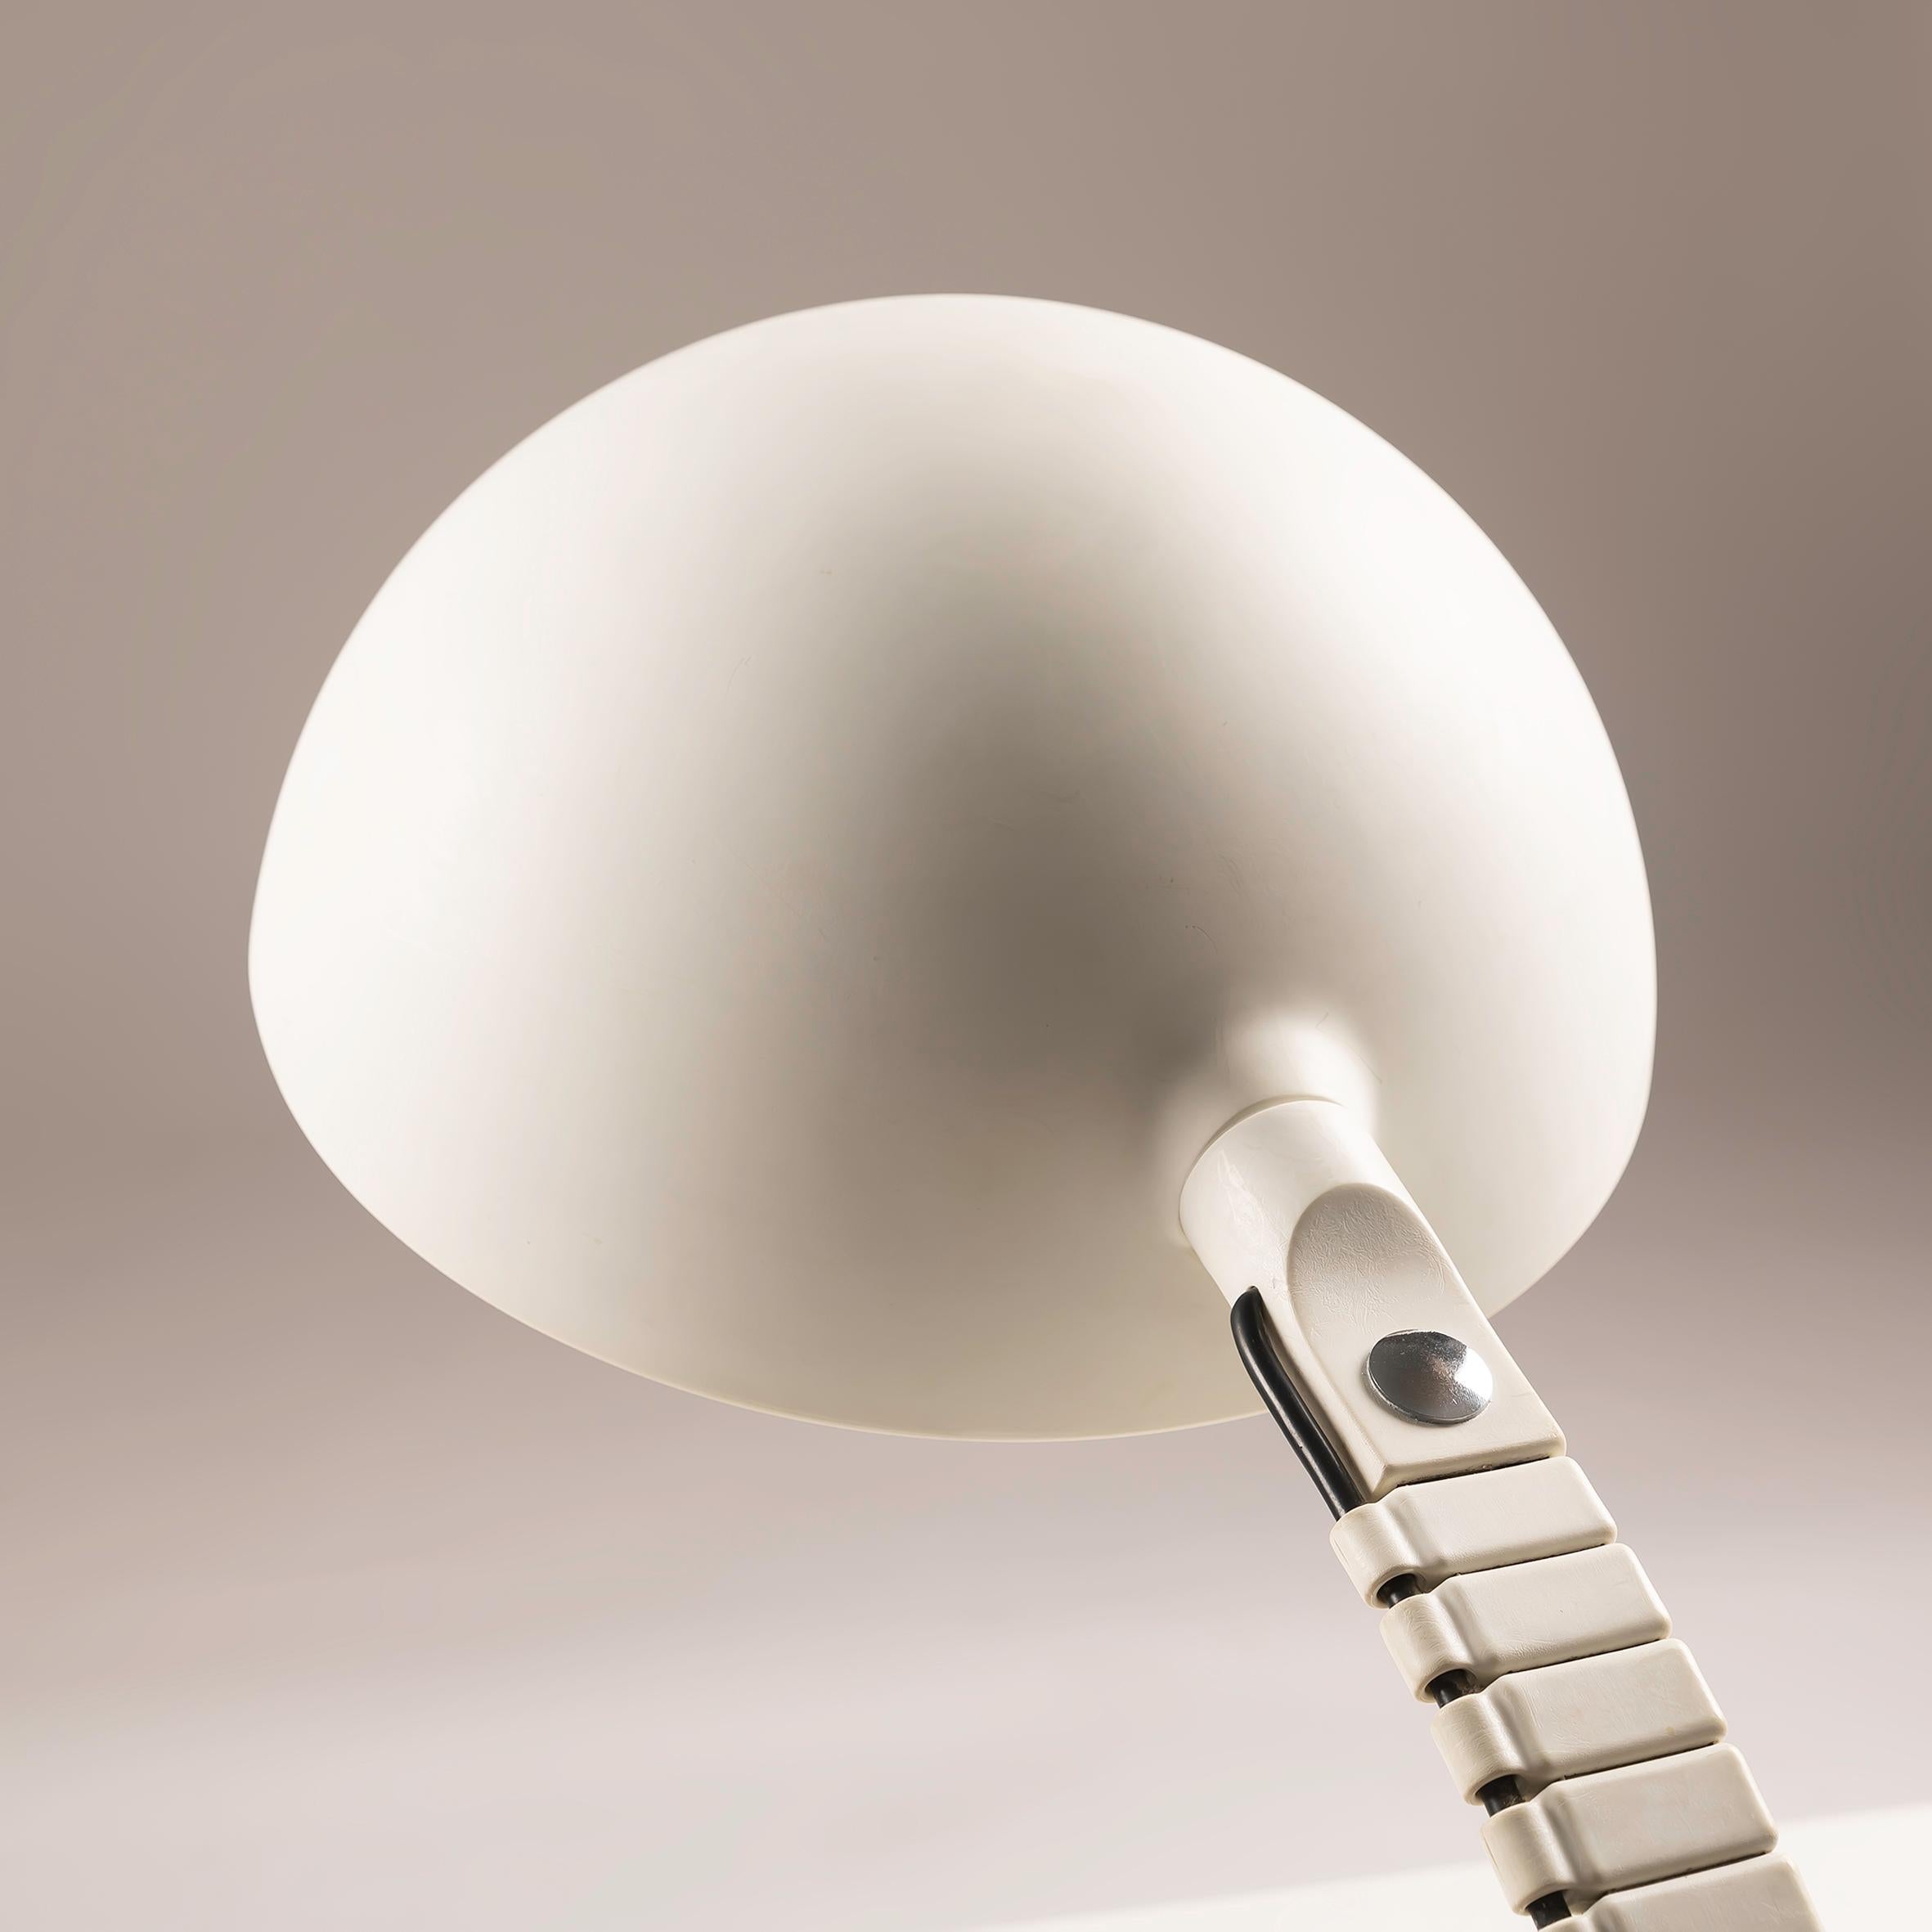 This Italian Lamp by Elio Martinelli for Martinelli Luce, No 660, crafted in Italy during the 1970s, is a must-have for any discerning collector or enthusiast of mid-century modern design. Elio Martinelli's innovative approach to lighting design is